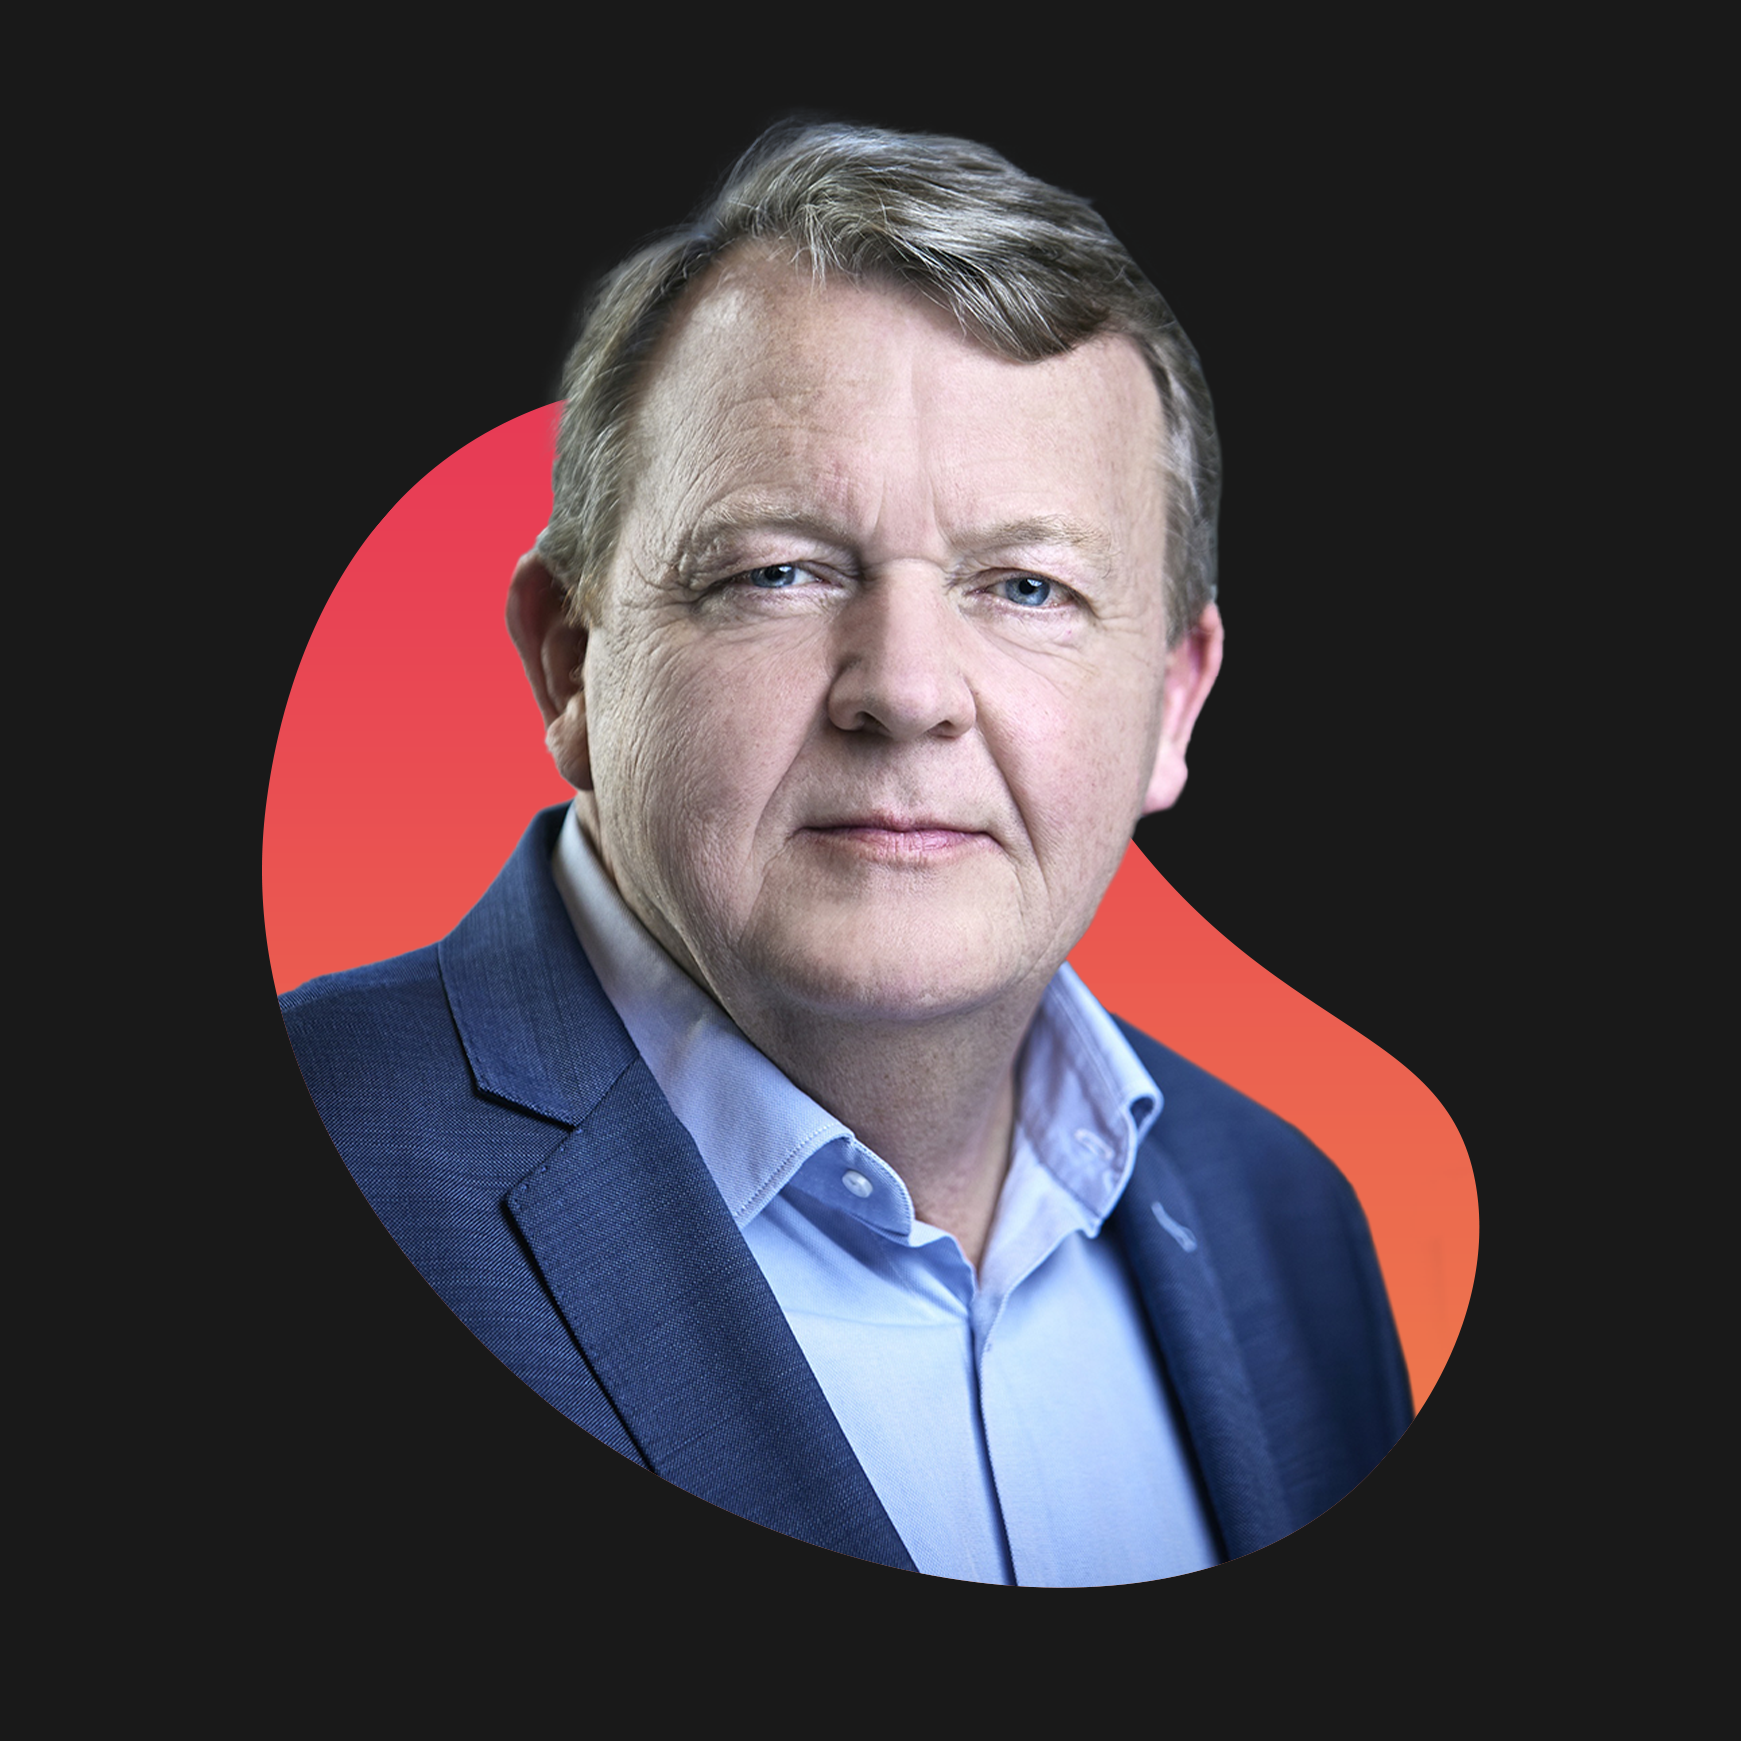 You are currently viewing Lars Løkke Rasmussen